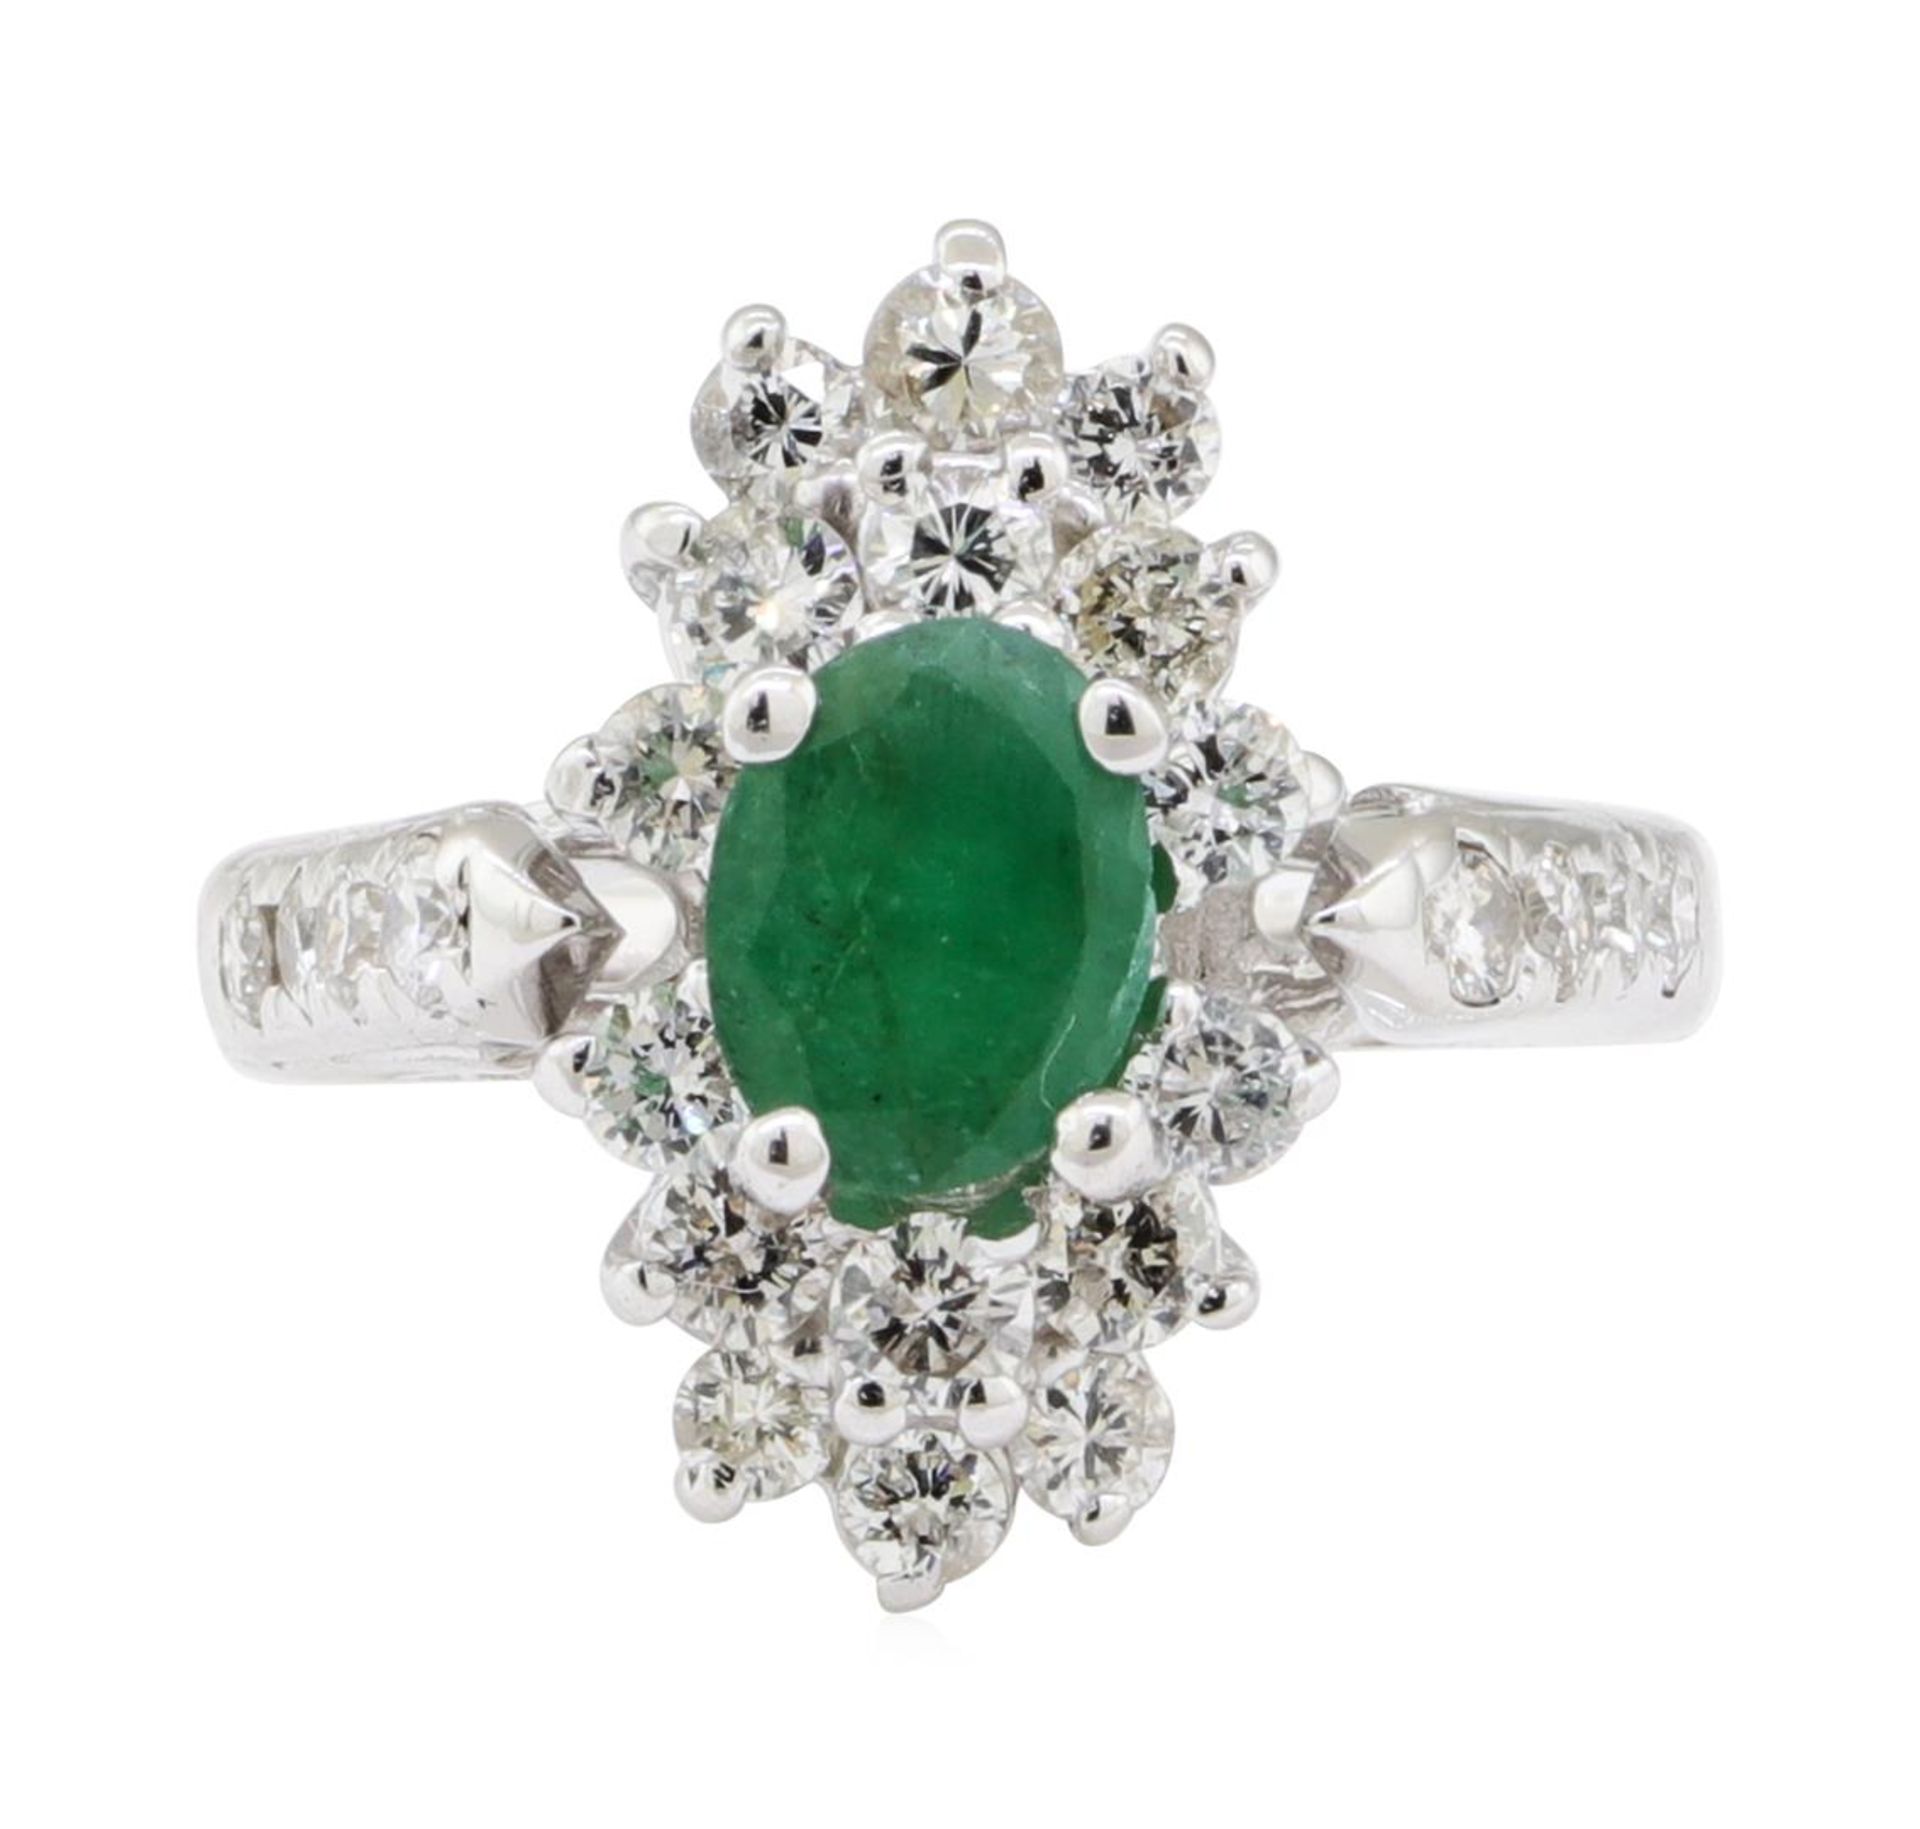 1.67 ctw Emerald and Diamond Ring - 14KT White Gold - Image 2 of 5